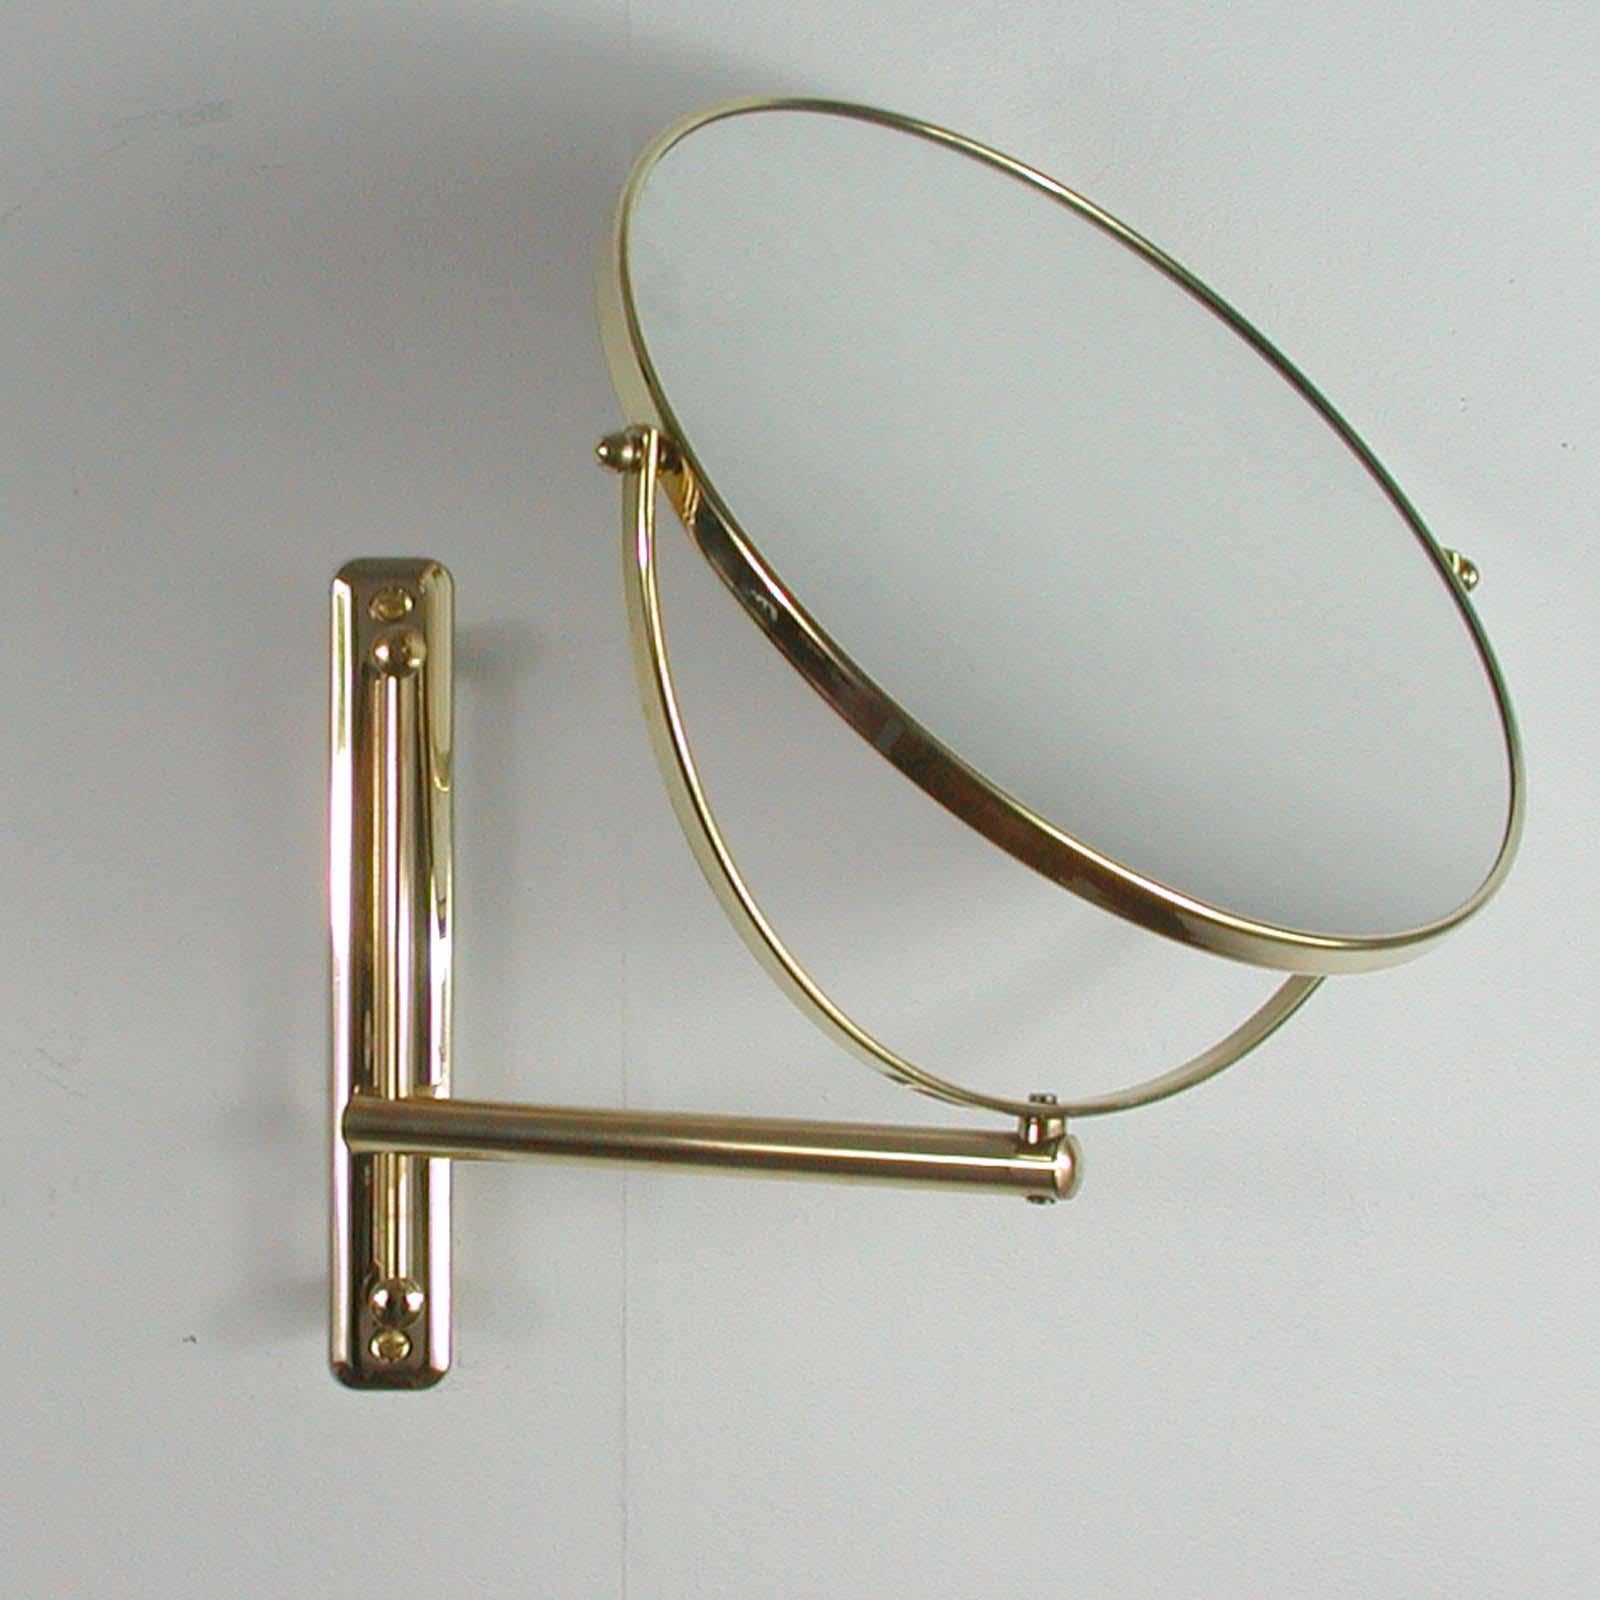 Italian Articulating and Adjustable Brass Vanity 2-Sided Wall Mirror, 1950s For Sale 5